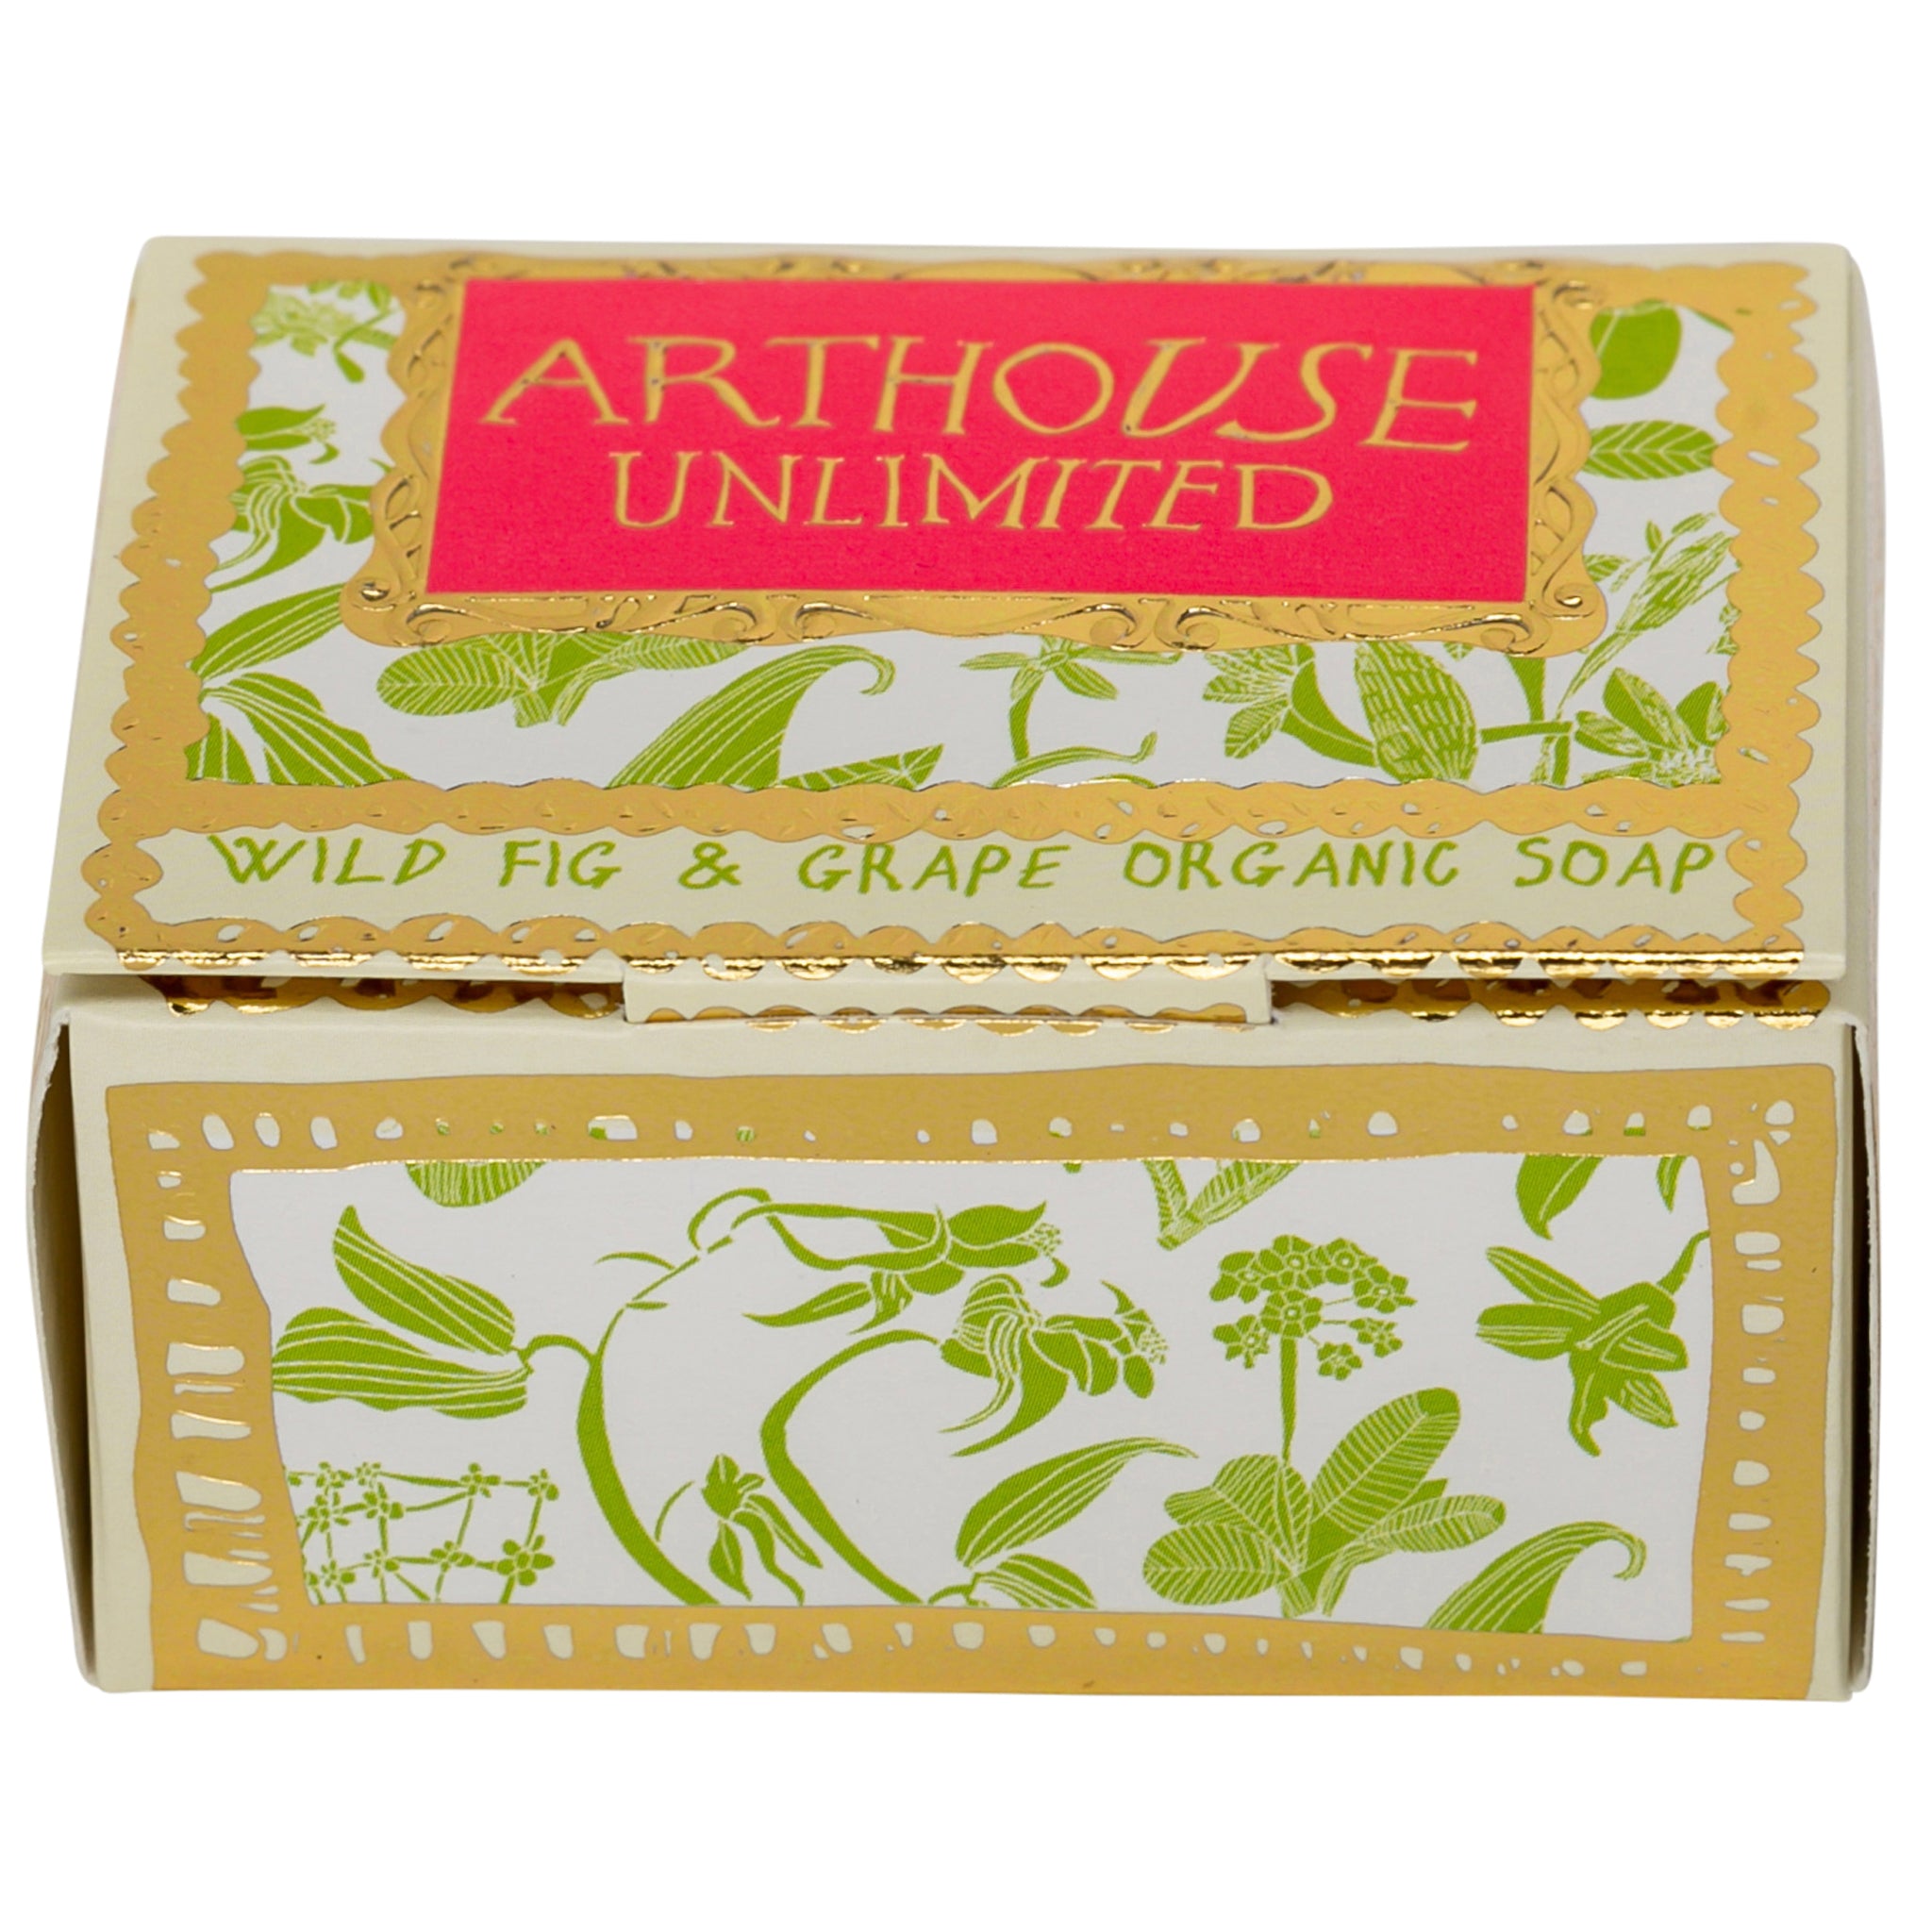 Laura's Floral, Triple Milled Organic Soap Slab in green and gold box